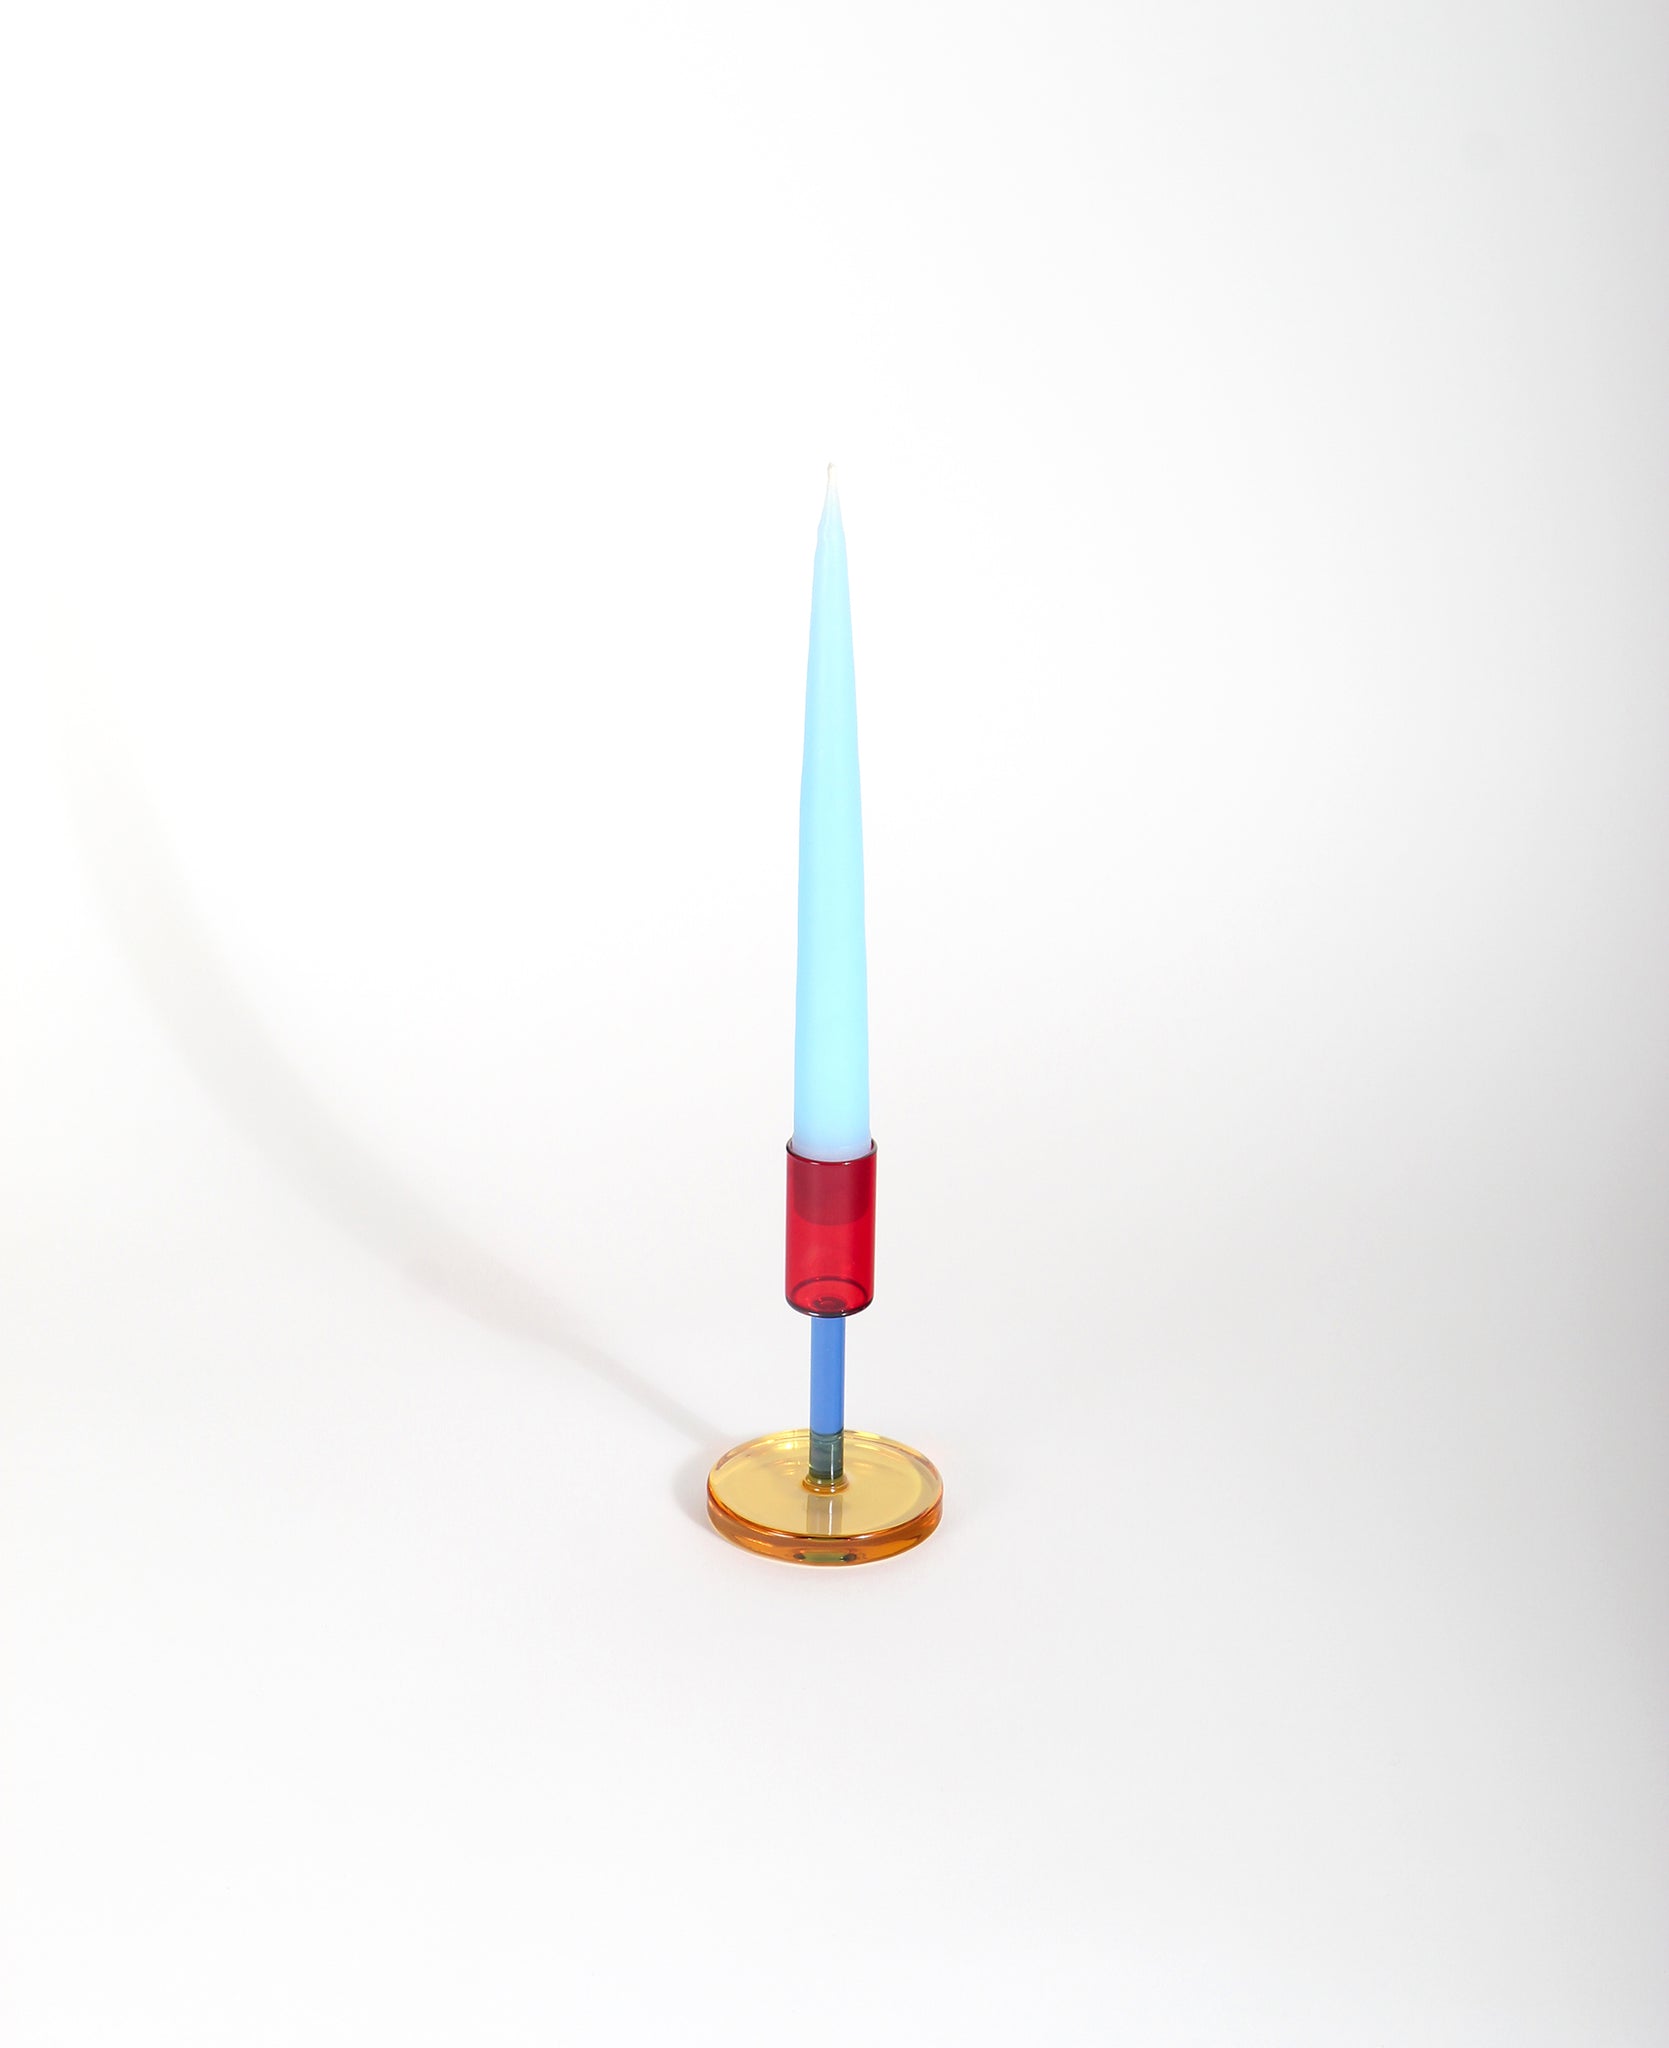 Glass Candlestick Holder in Red, Blue, and Yellow